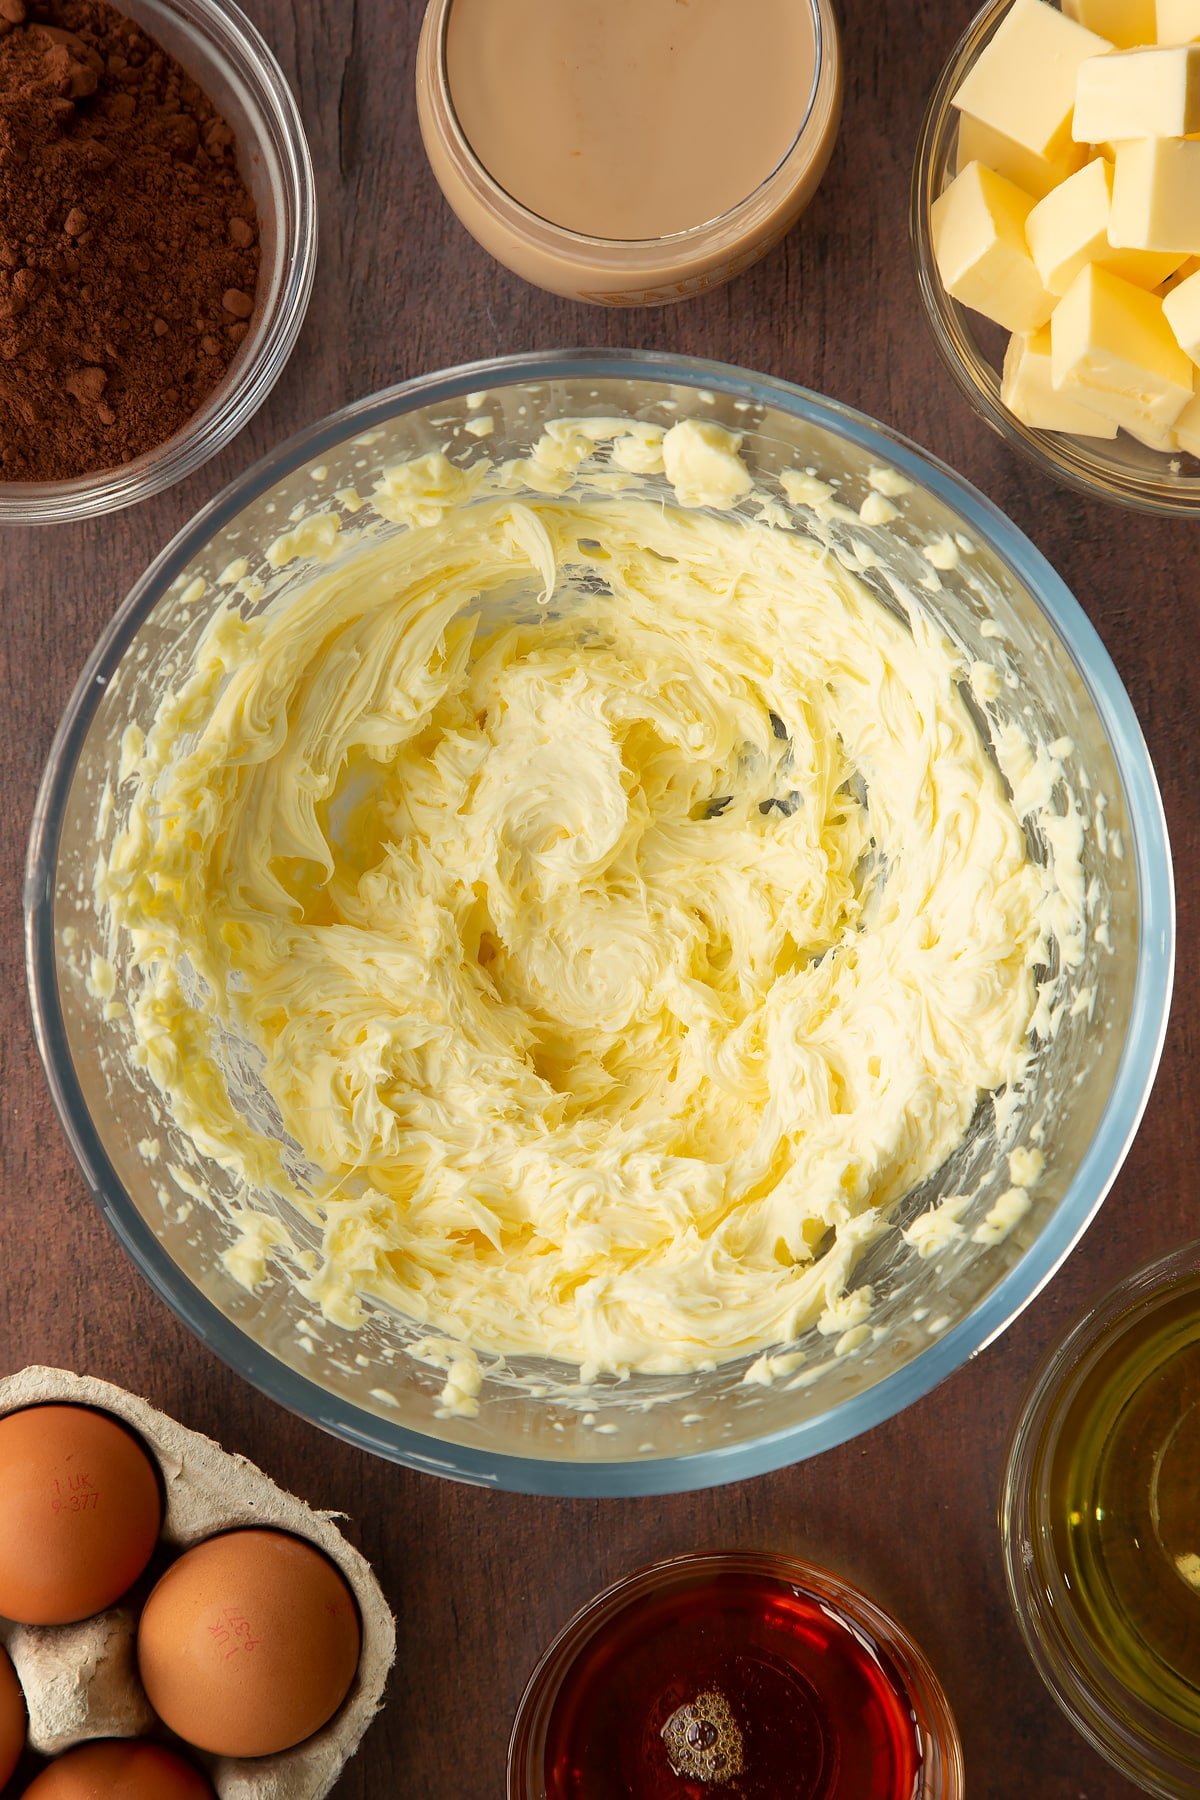 Whipped butter in a glass mixing bowl. Ingredients to make a Baileys cake surround the bowl.